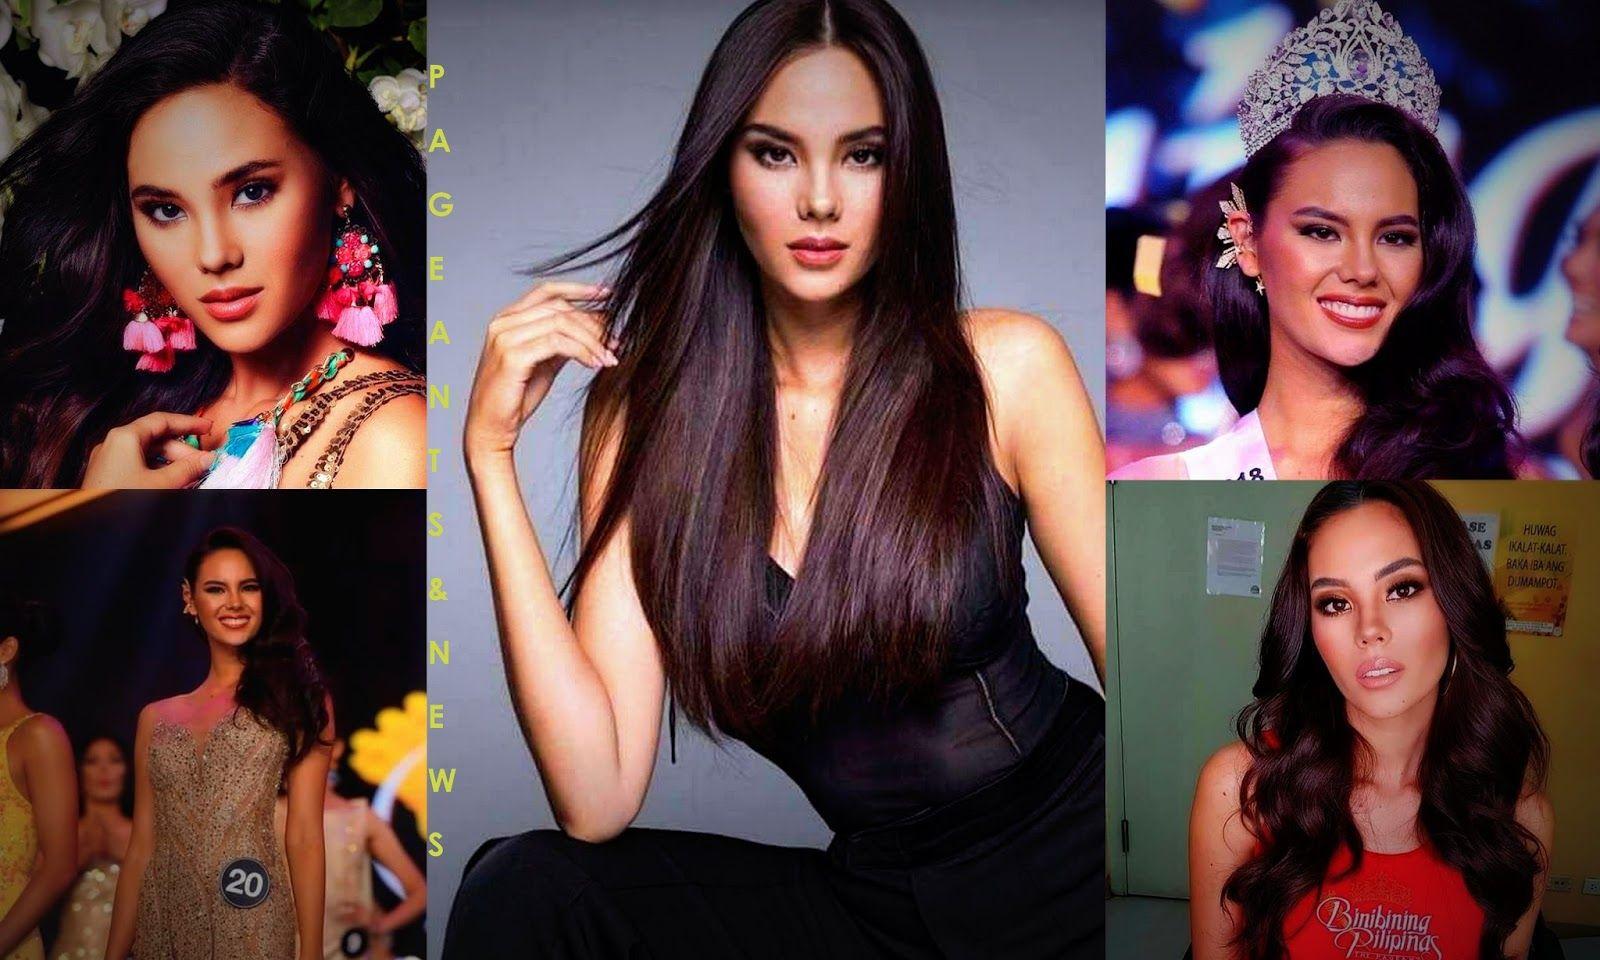 Reasons why Miss Universe Philippines 2018 Catriona Gray is